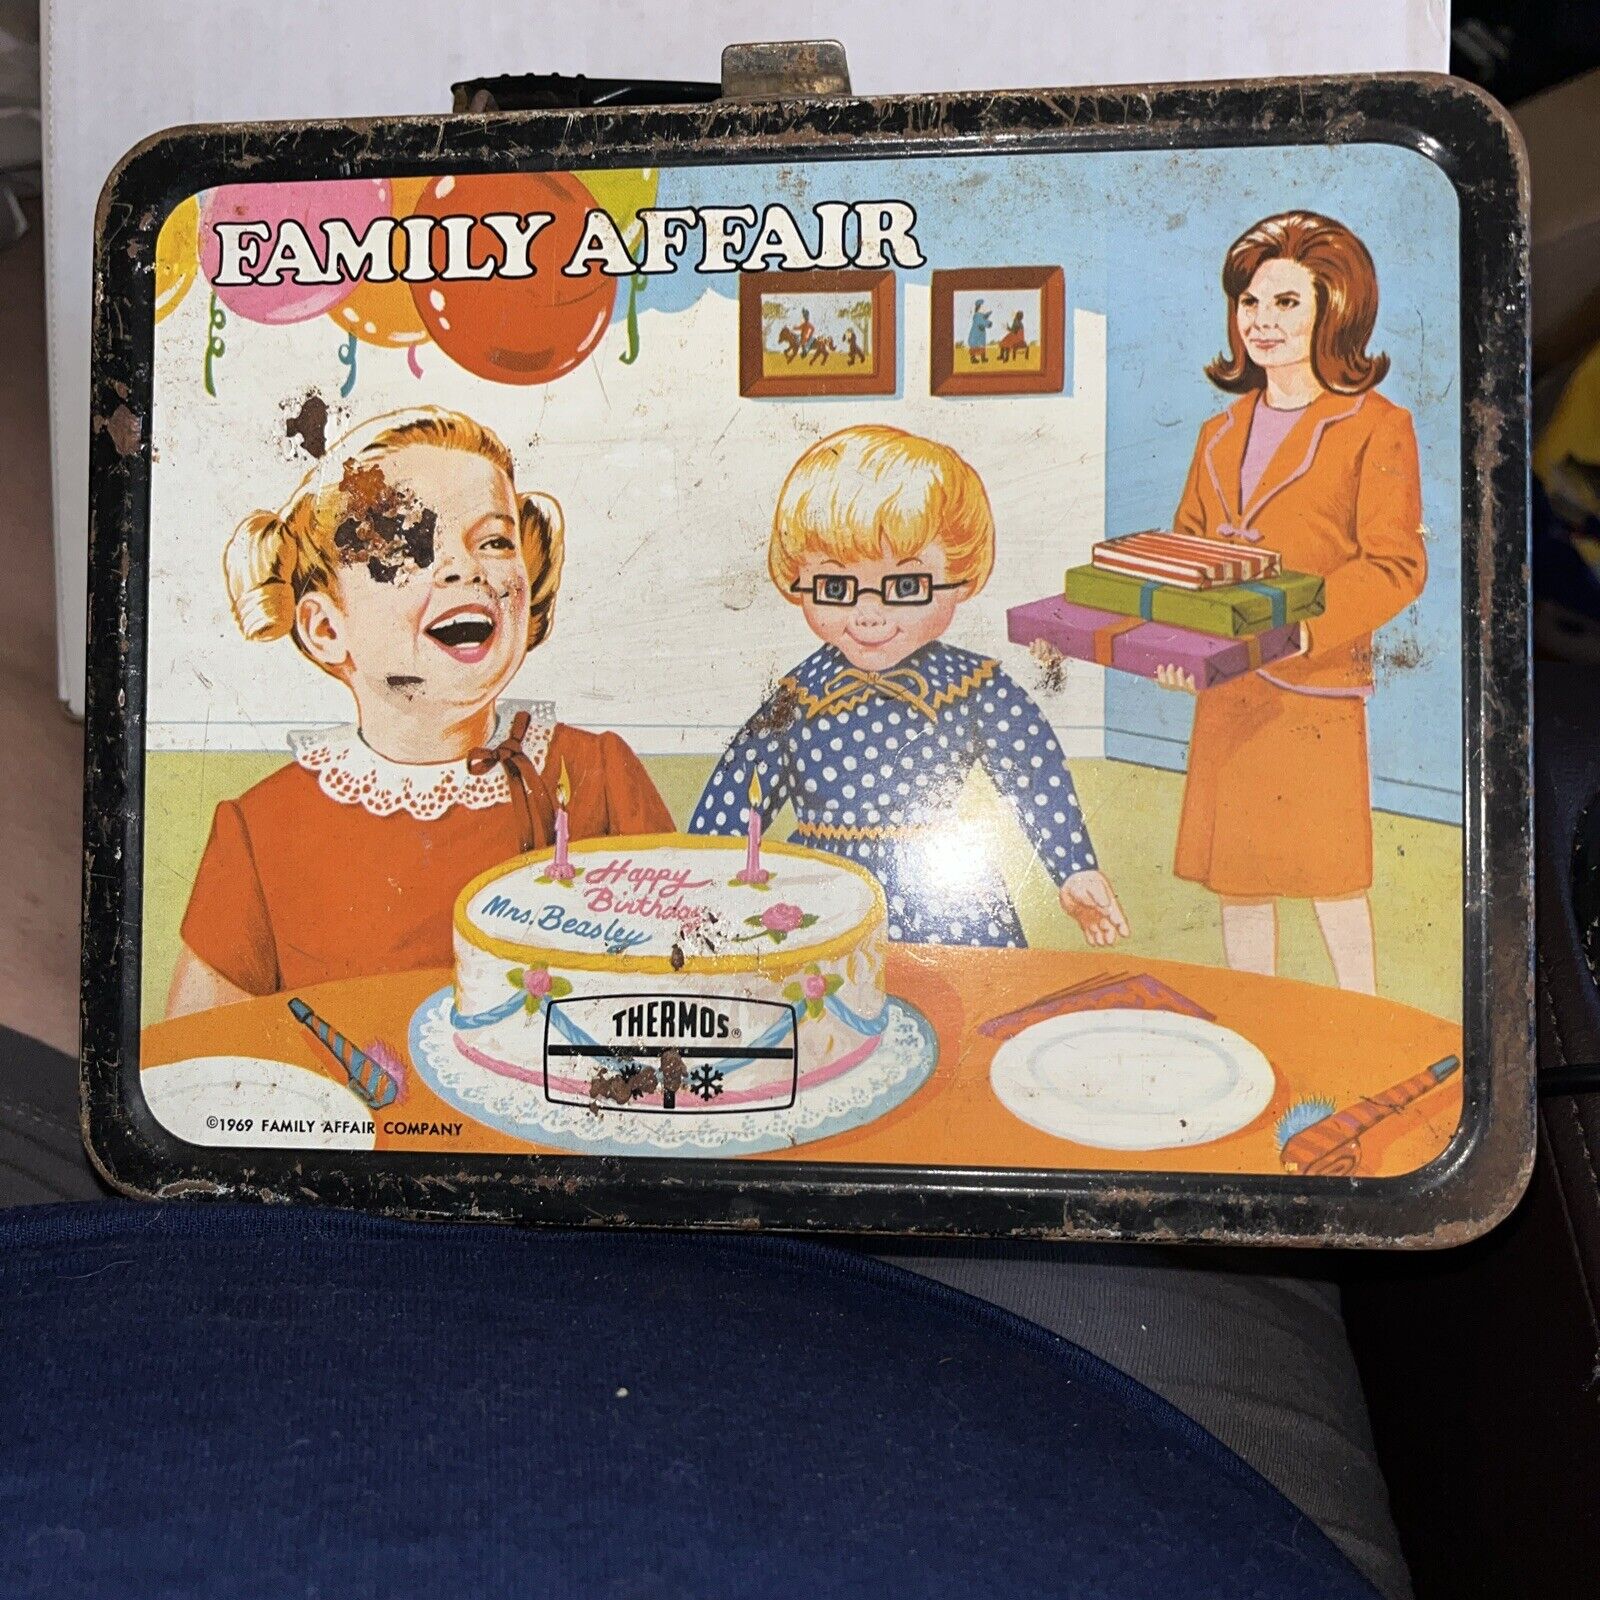 Vintage 1969 Family Affair , King Sealy   FAMILY AFFAIR Metal Lunchbox - NO TH